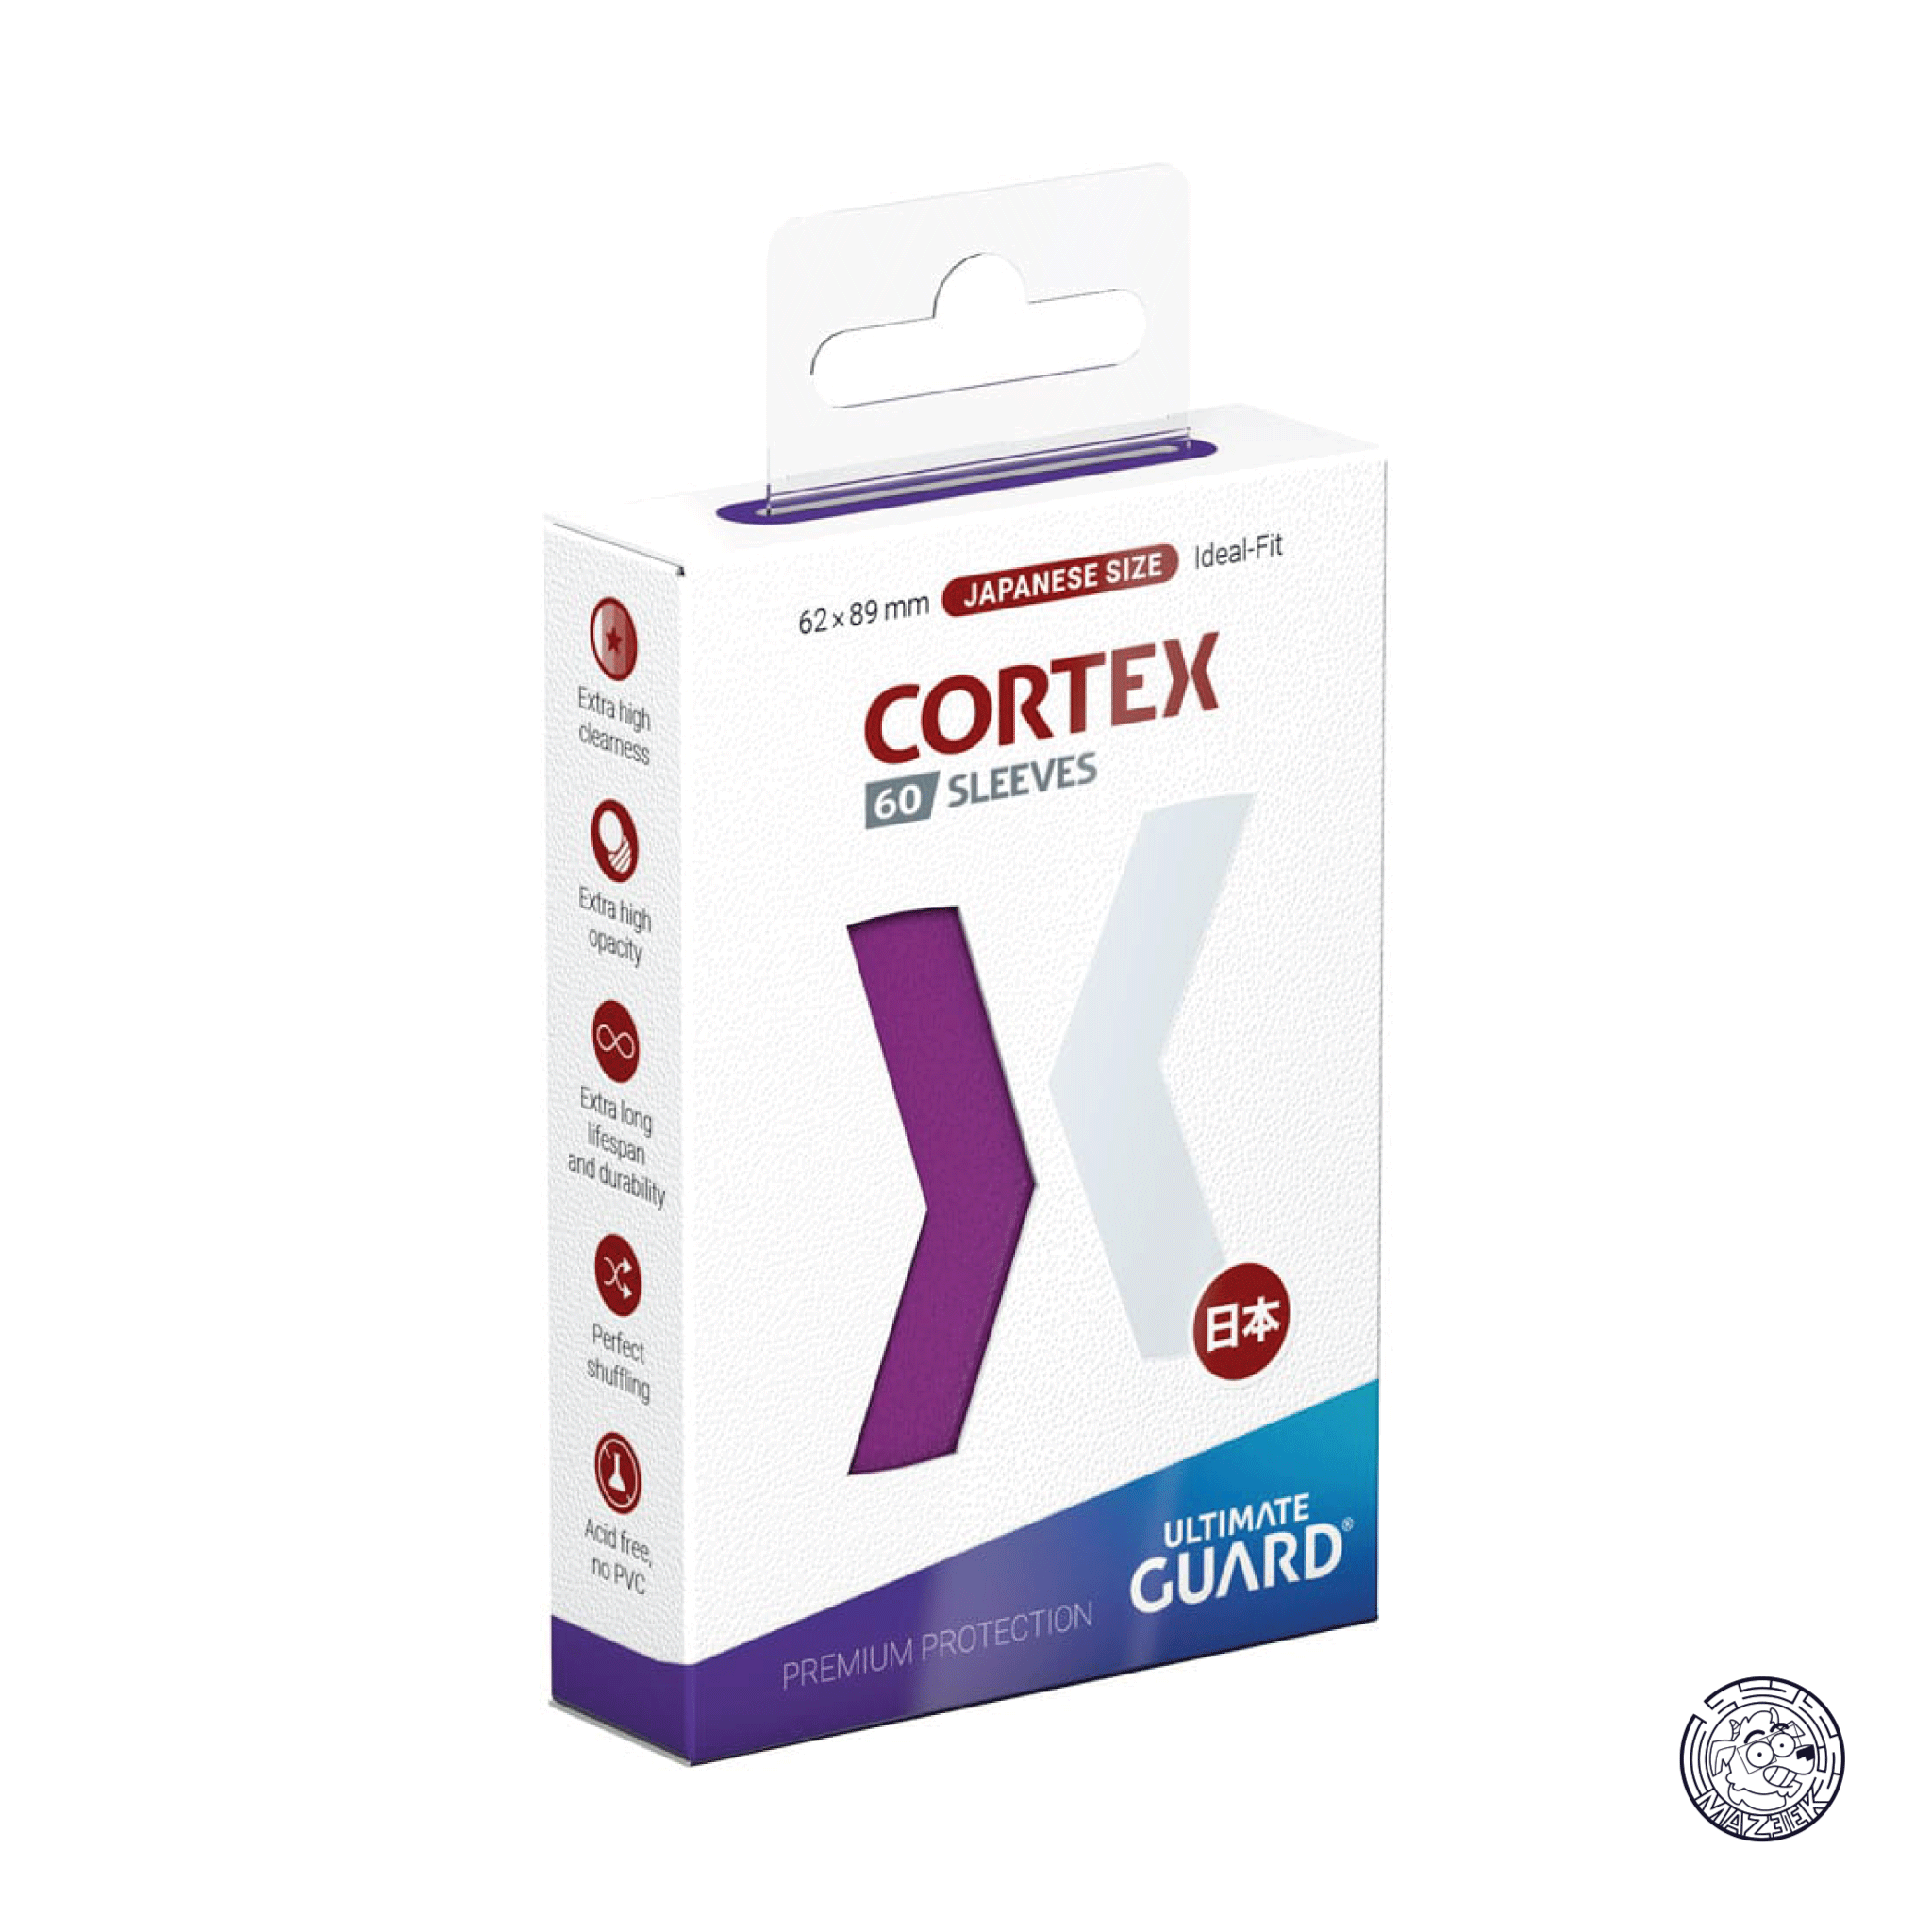 Ultimate Guard - 60 Sleeves Cortex: Japanese Size 62x89 mm (Purple)